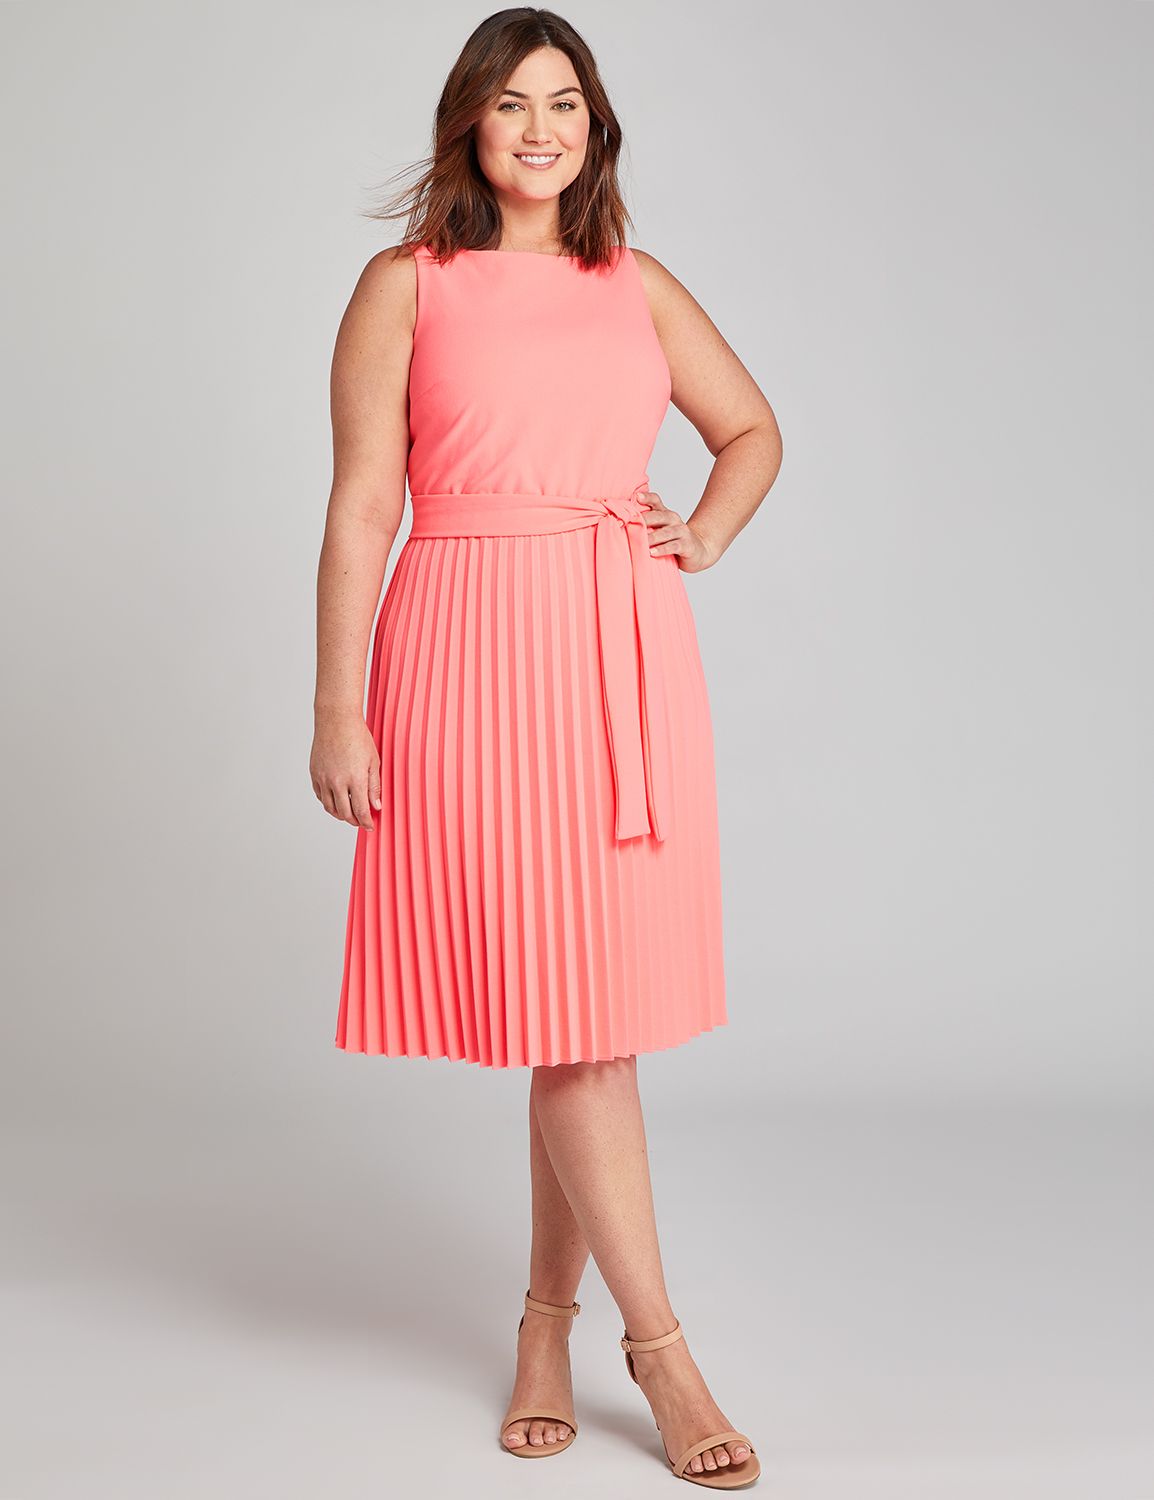 pink fit and flare dress plus size